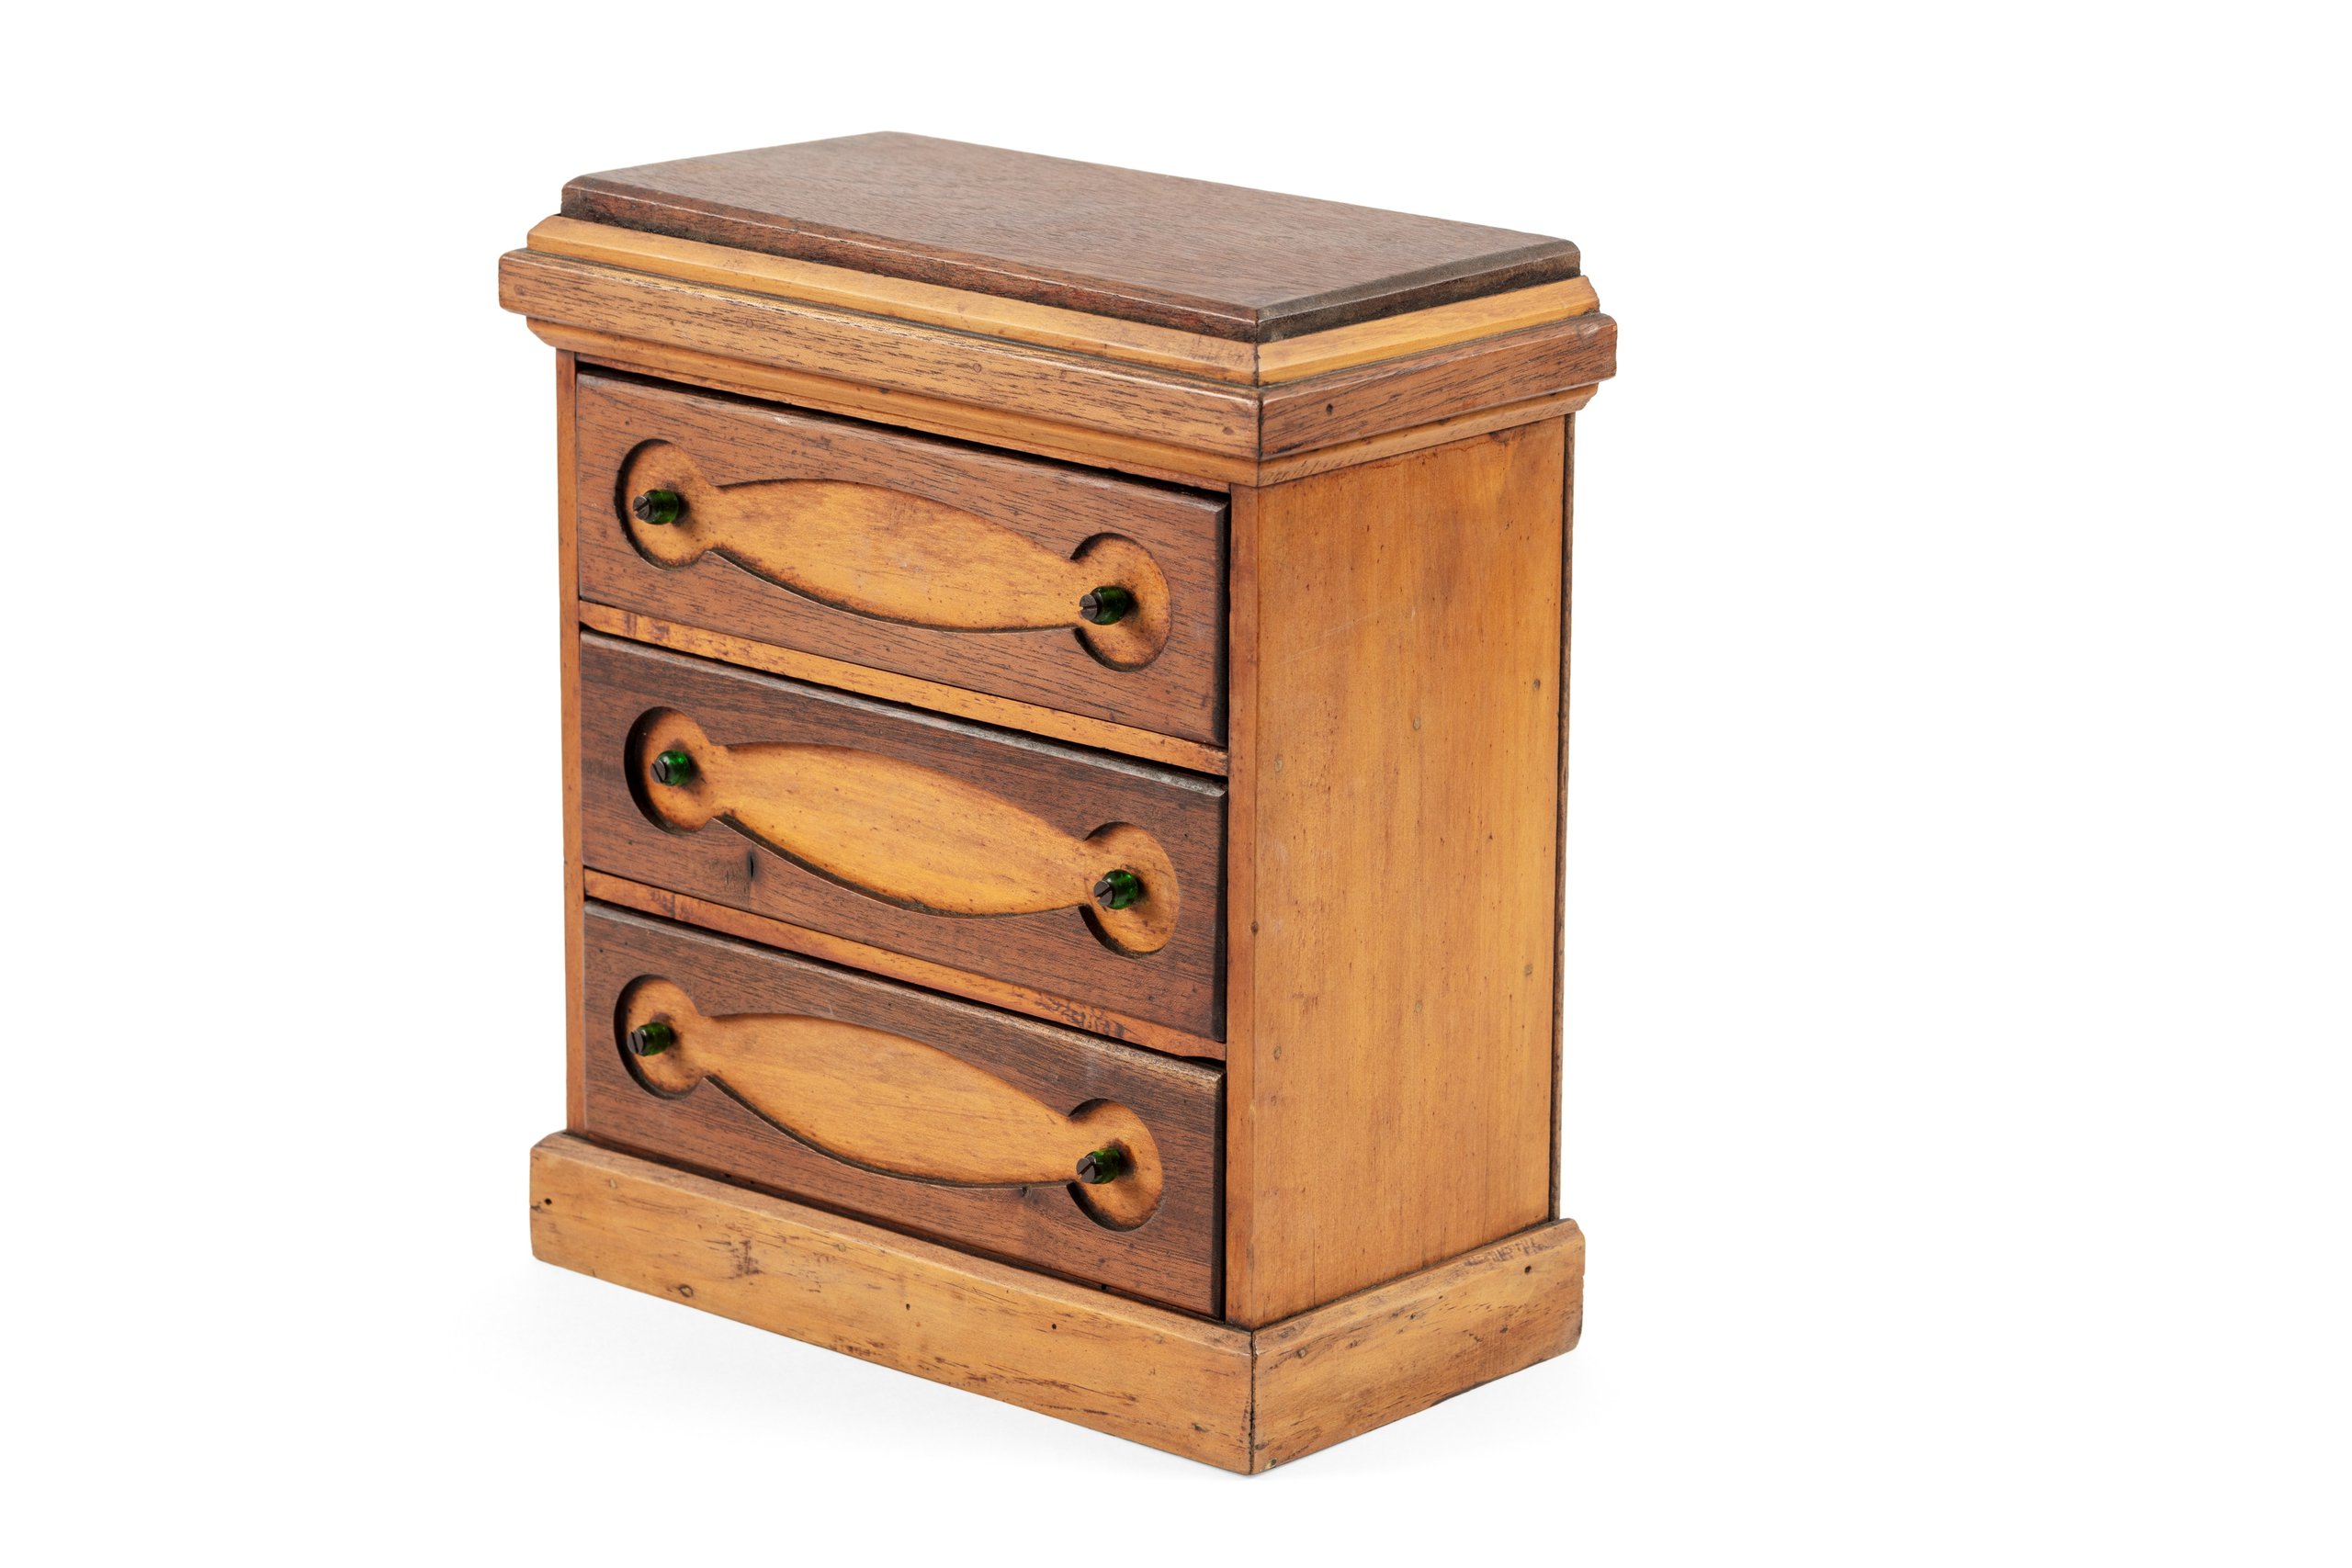 Toy chest of drawers by John Stark